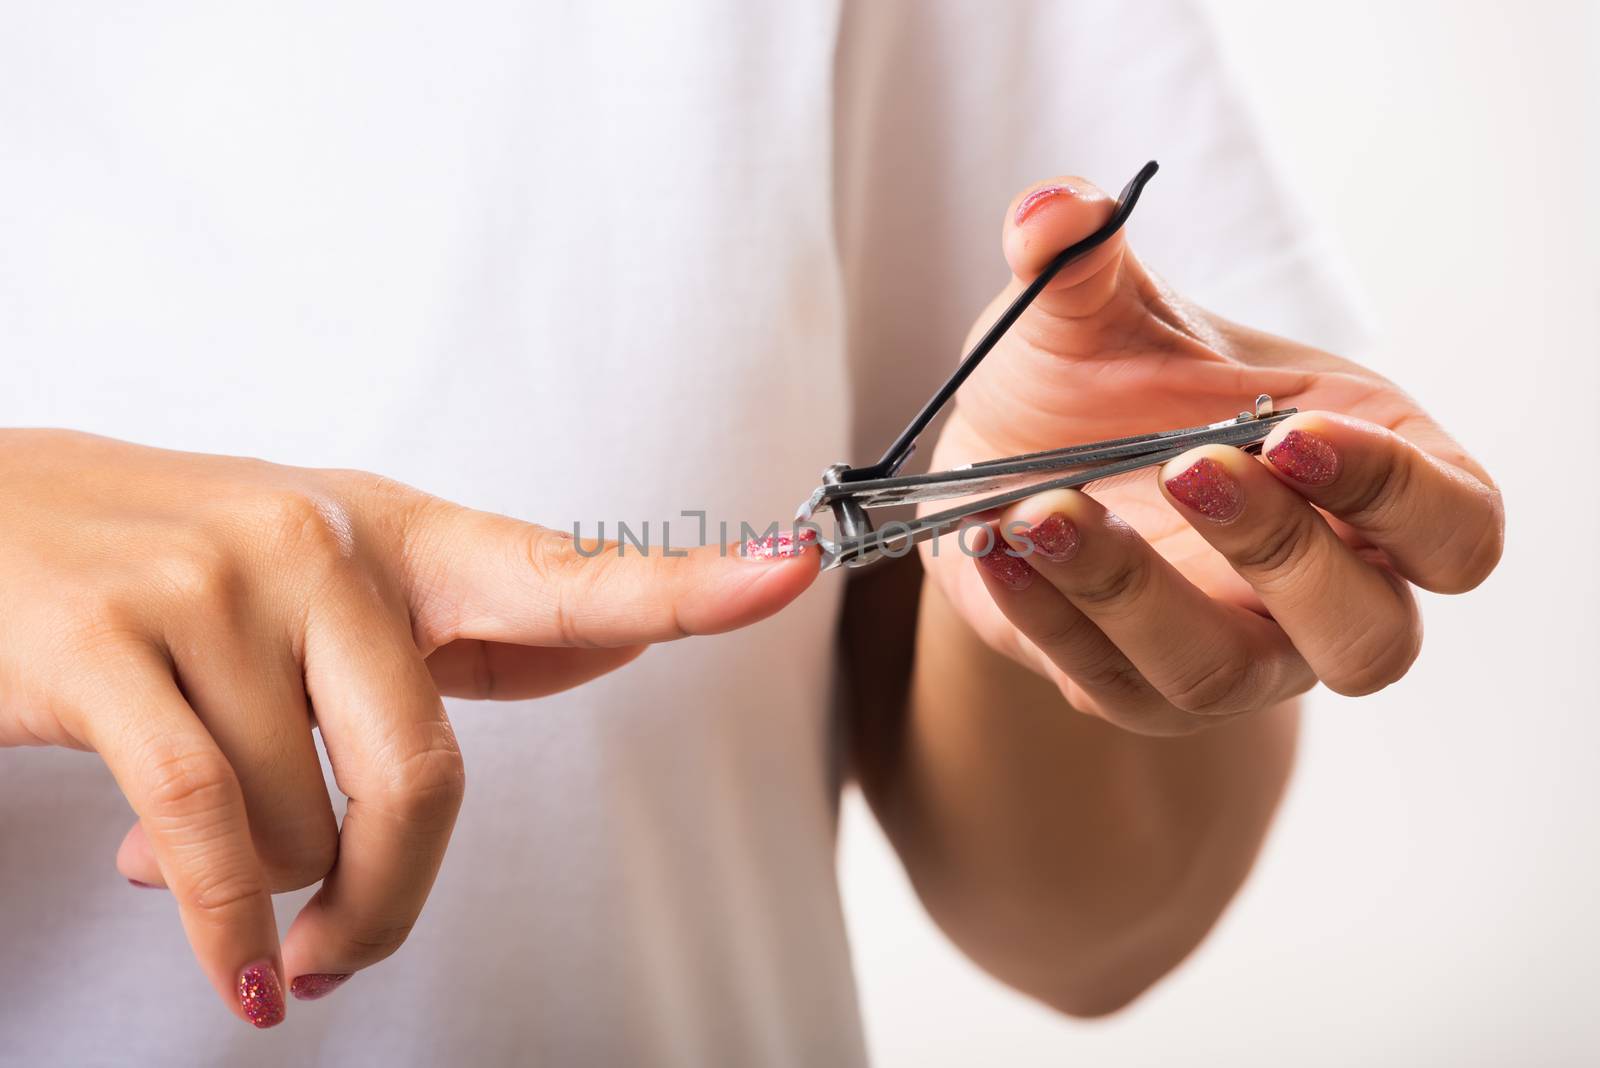 Close up young Asian woman have tool cutting nails fingernails on finger using a nail clipper. Female using tweezers by herself, studio shot isolated on white background, Healthcare concept